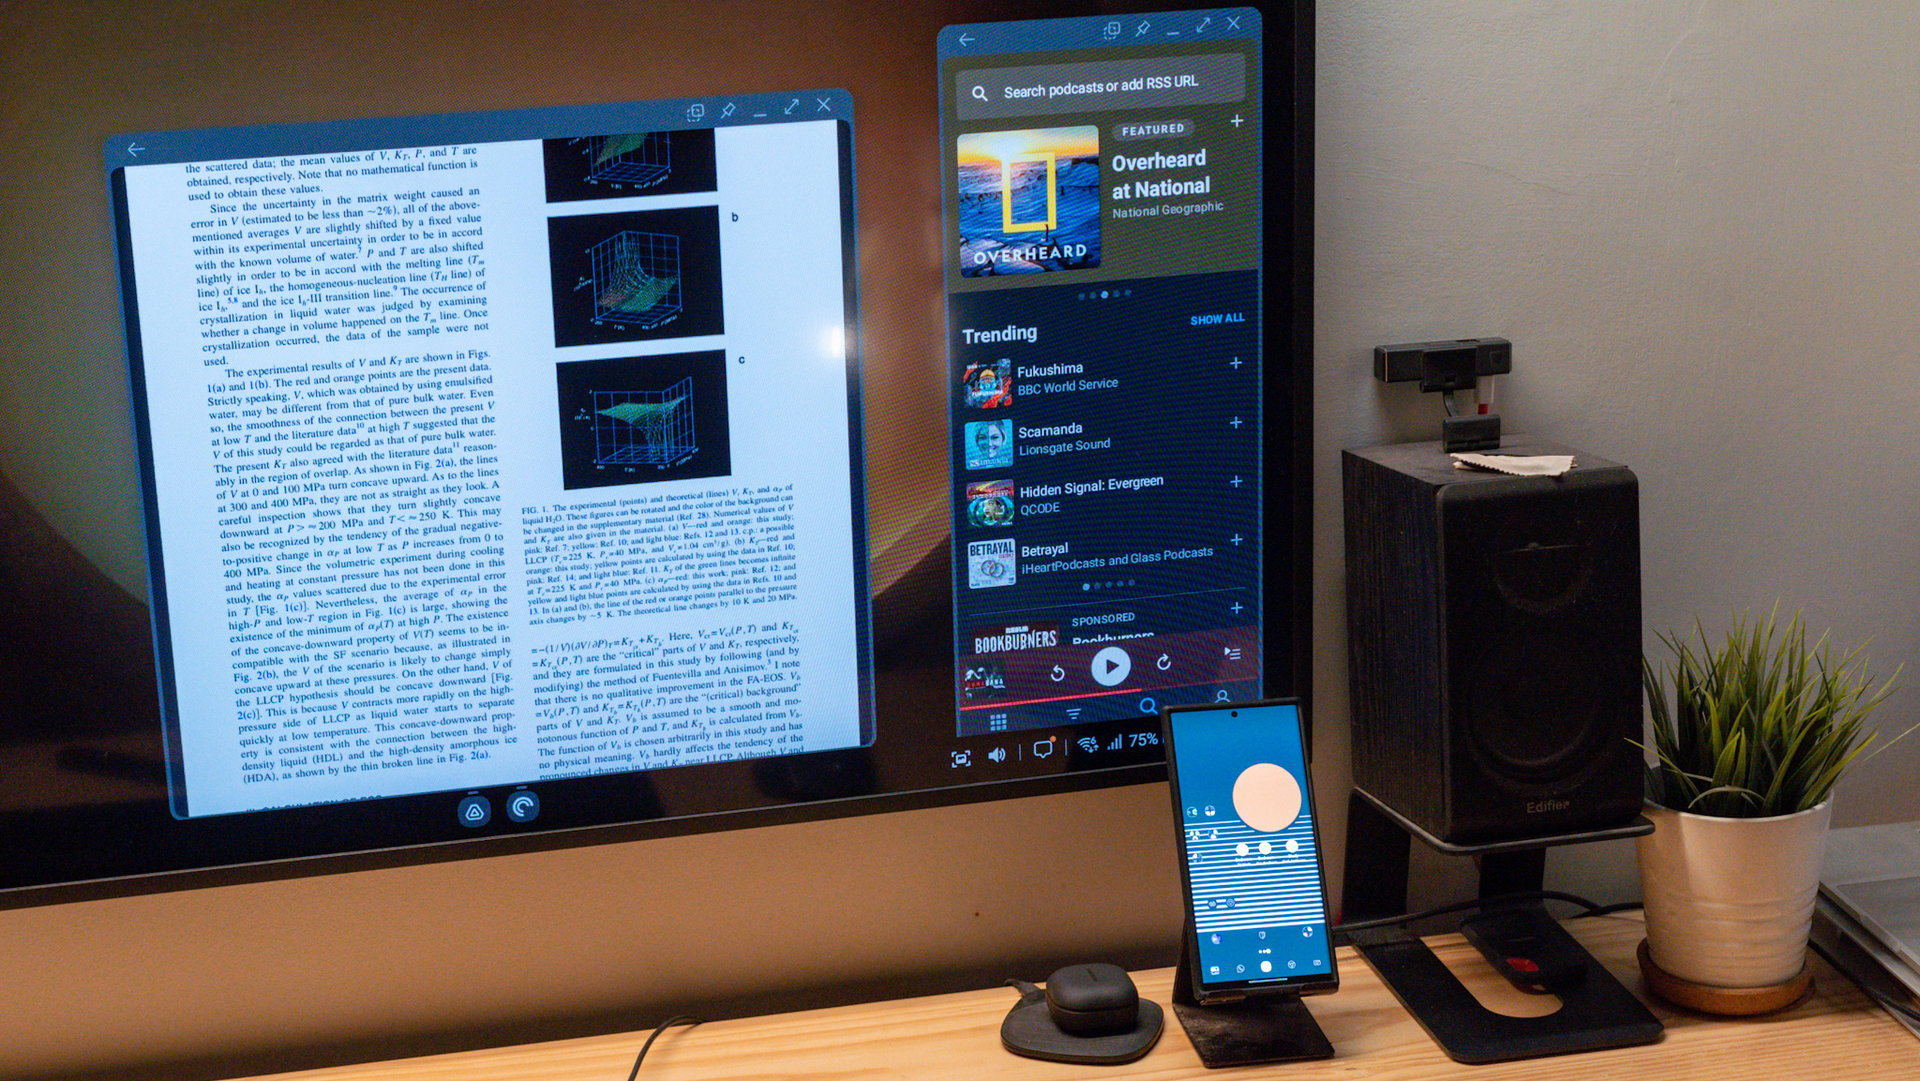 Pocket Casts and Documents on Samsung Wireless Dex